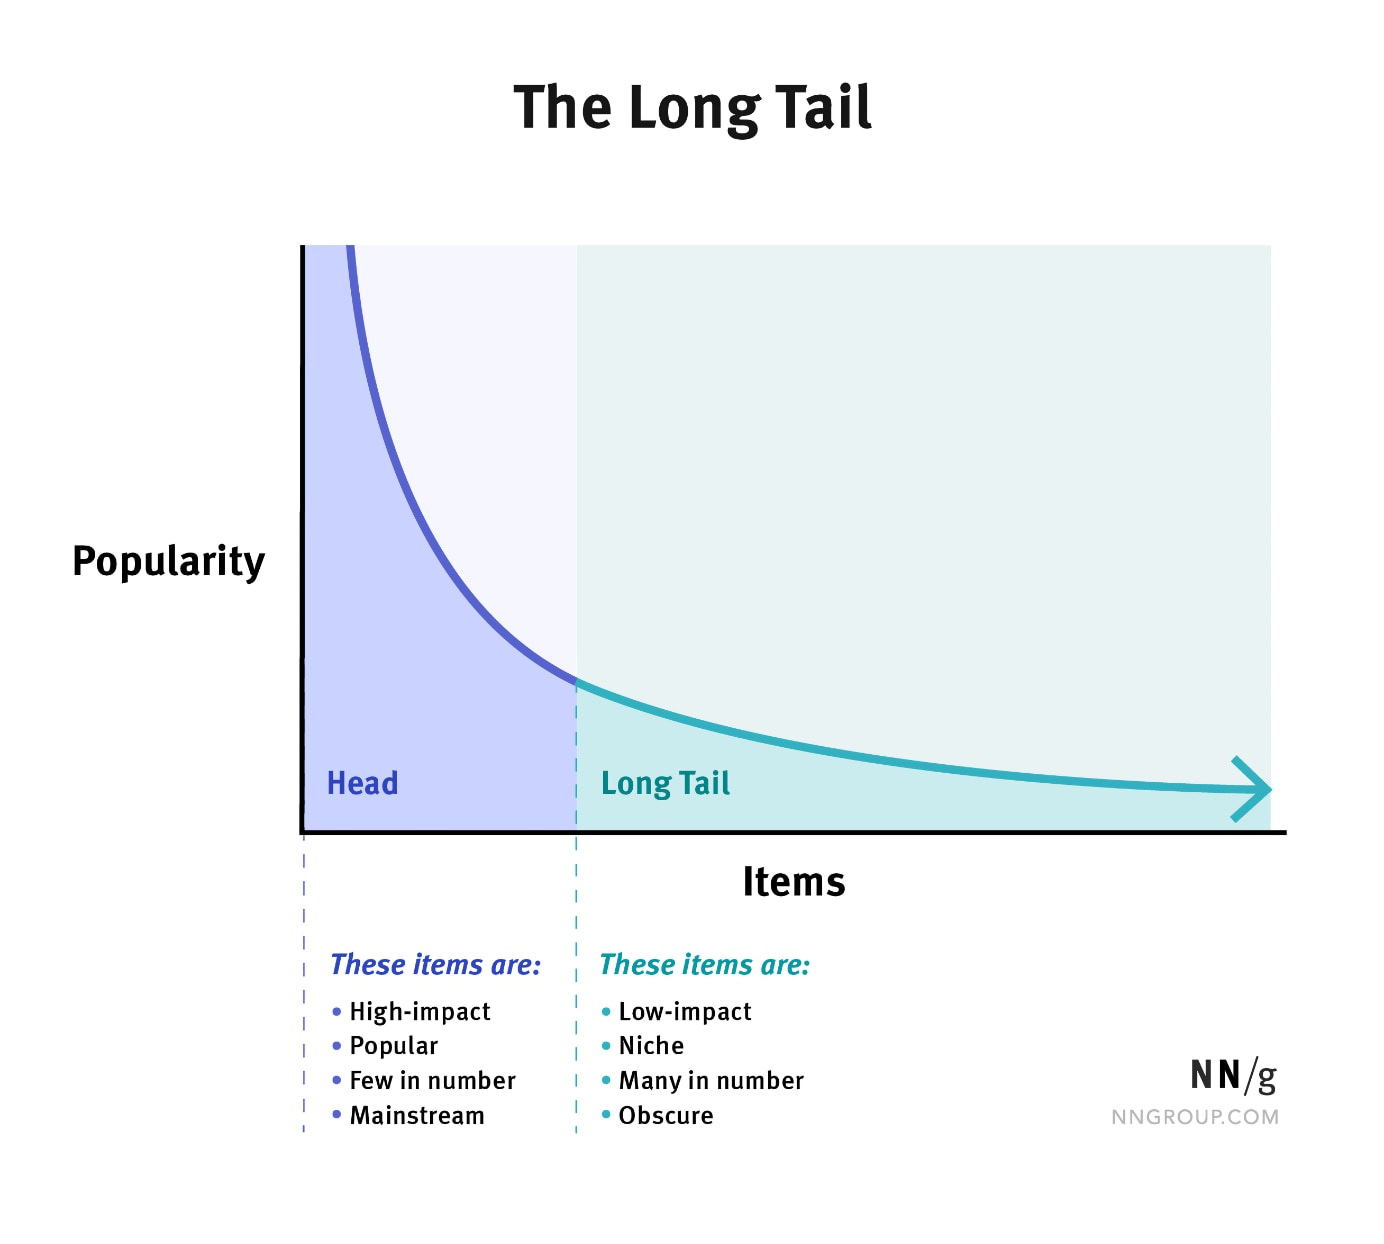 Recognize Strategic Opportunities with Long-Tail Data